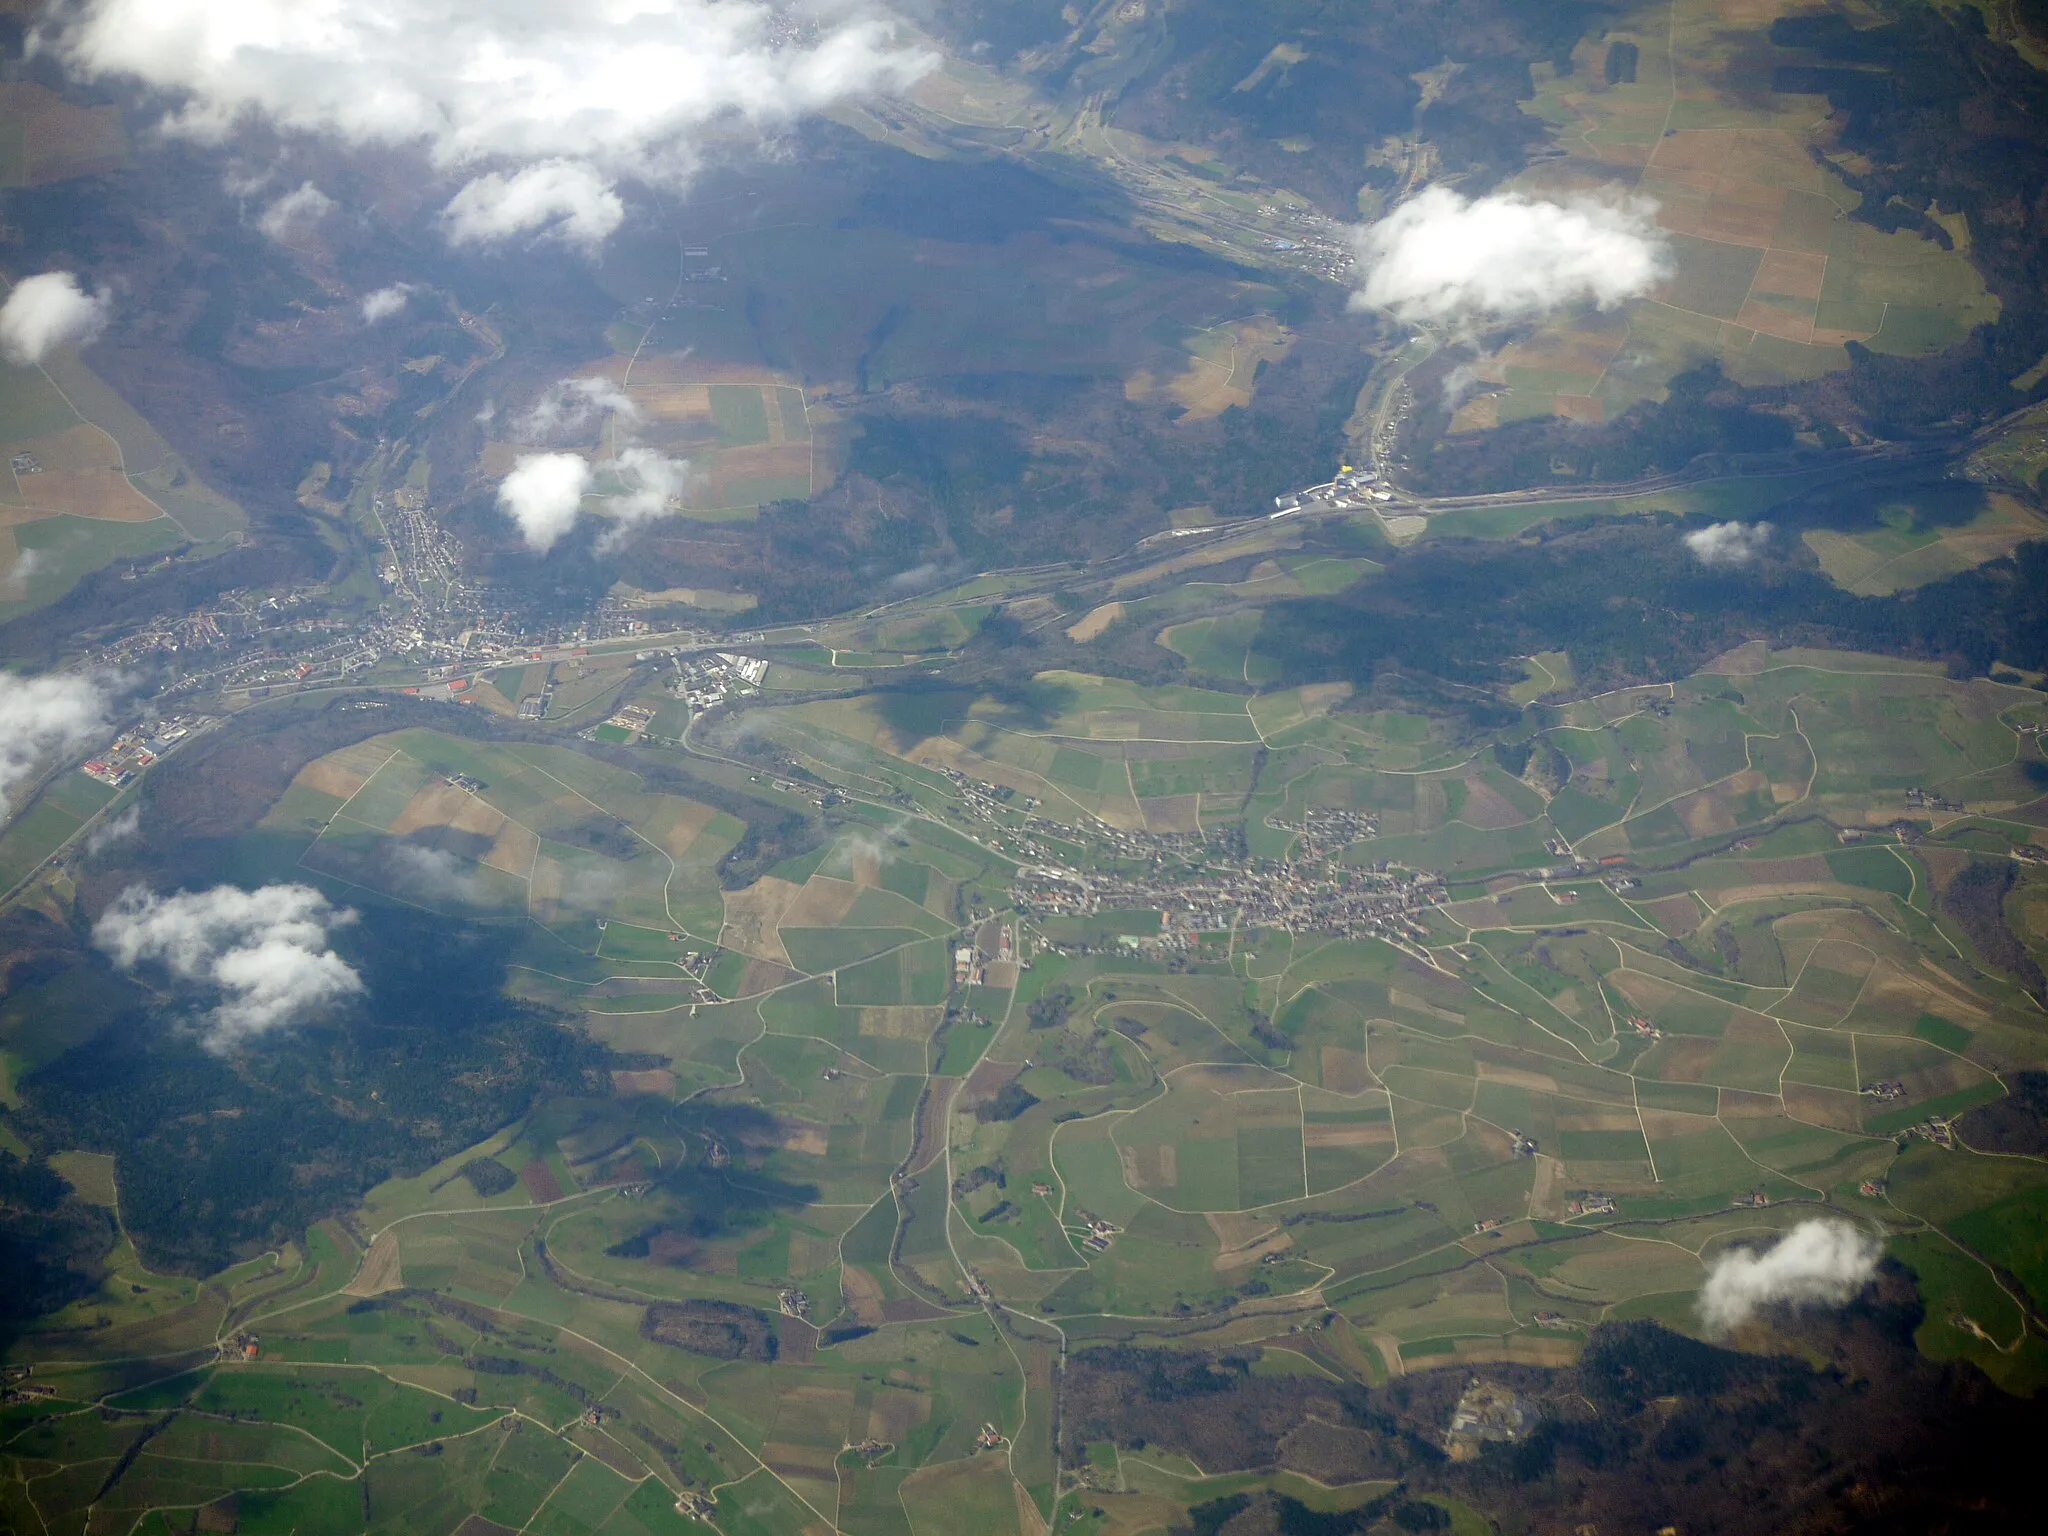 Photo showing: Weizen - Bahnhof - Beggingen, photograph taken from the sky, on the fly line between Marseille and Stockholm.